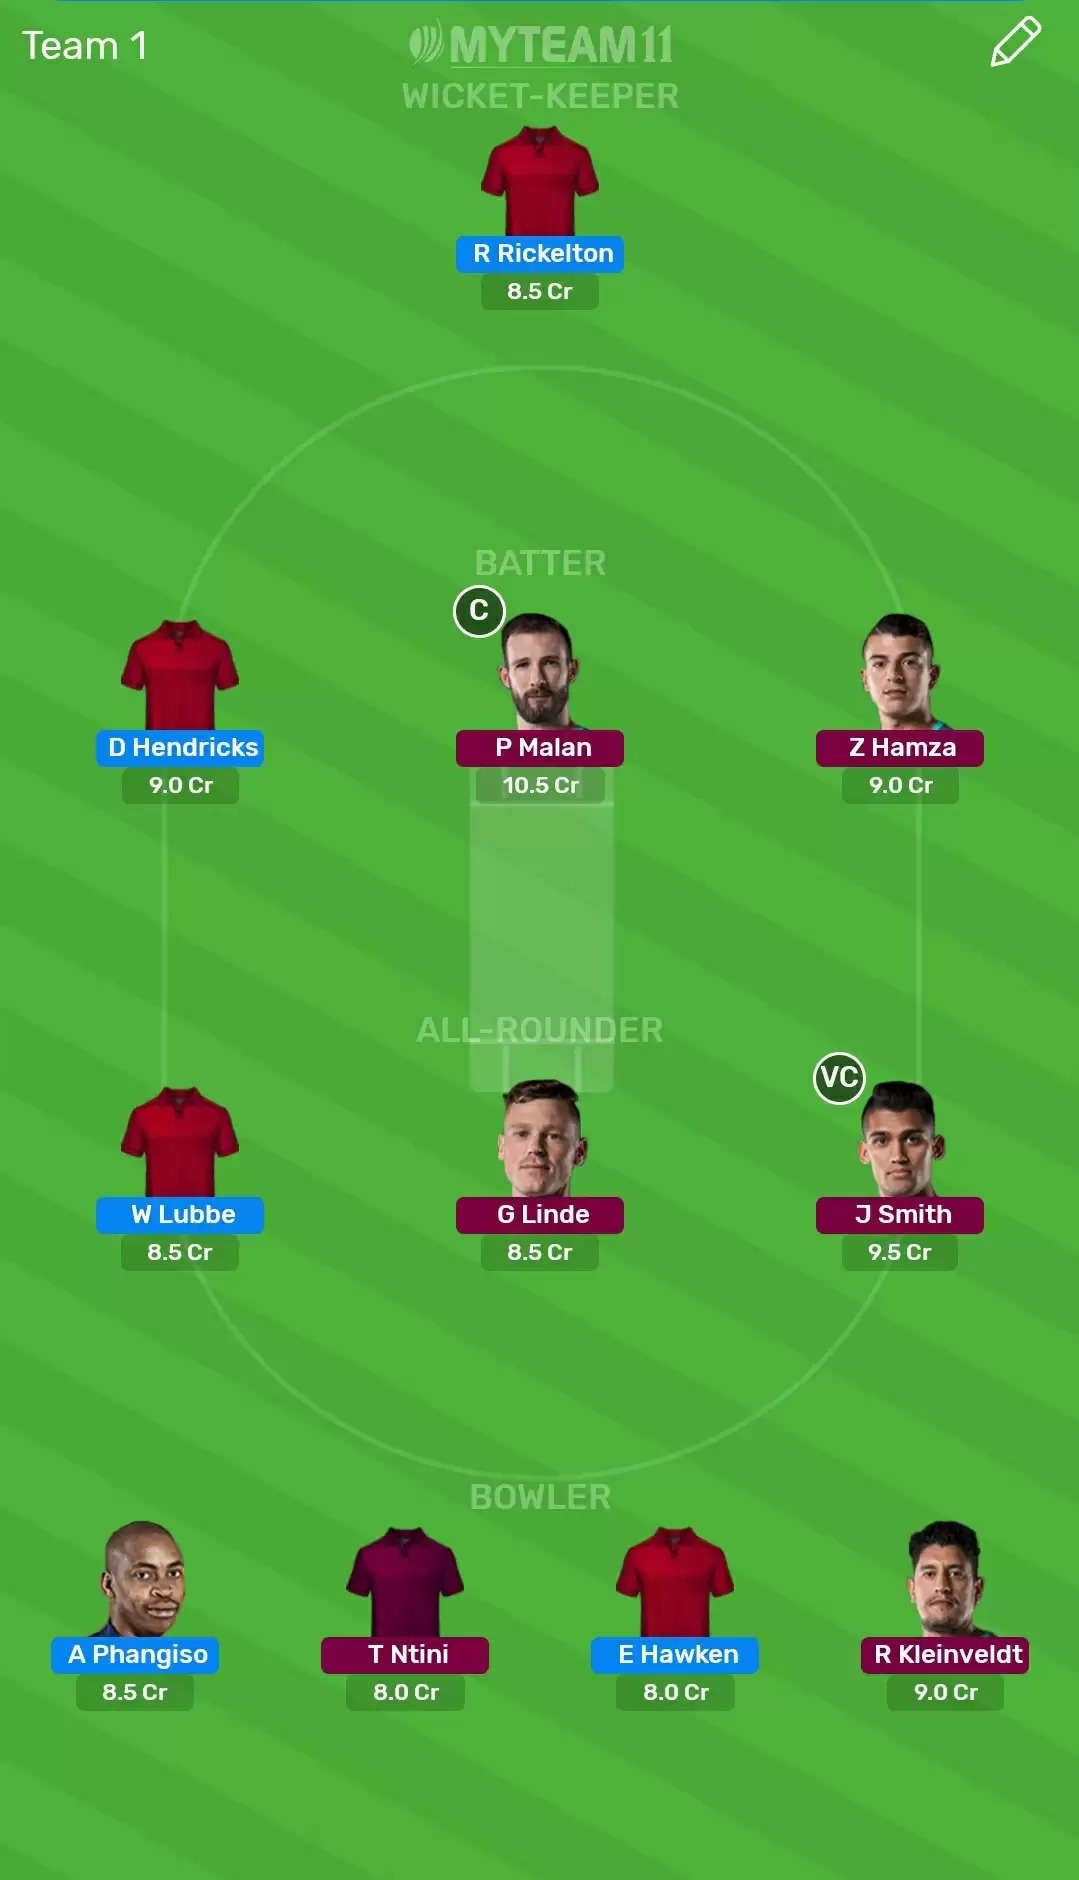 CC vs HL Dream11 Fantasy Cricket Prediction – Momentum One Day Cup, Match 4 : Cape Cobras vs Lions Dream11 & MyTeam11 Team, Preview, Probable Playing XI, Pitch Report And Weather Conditions